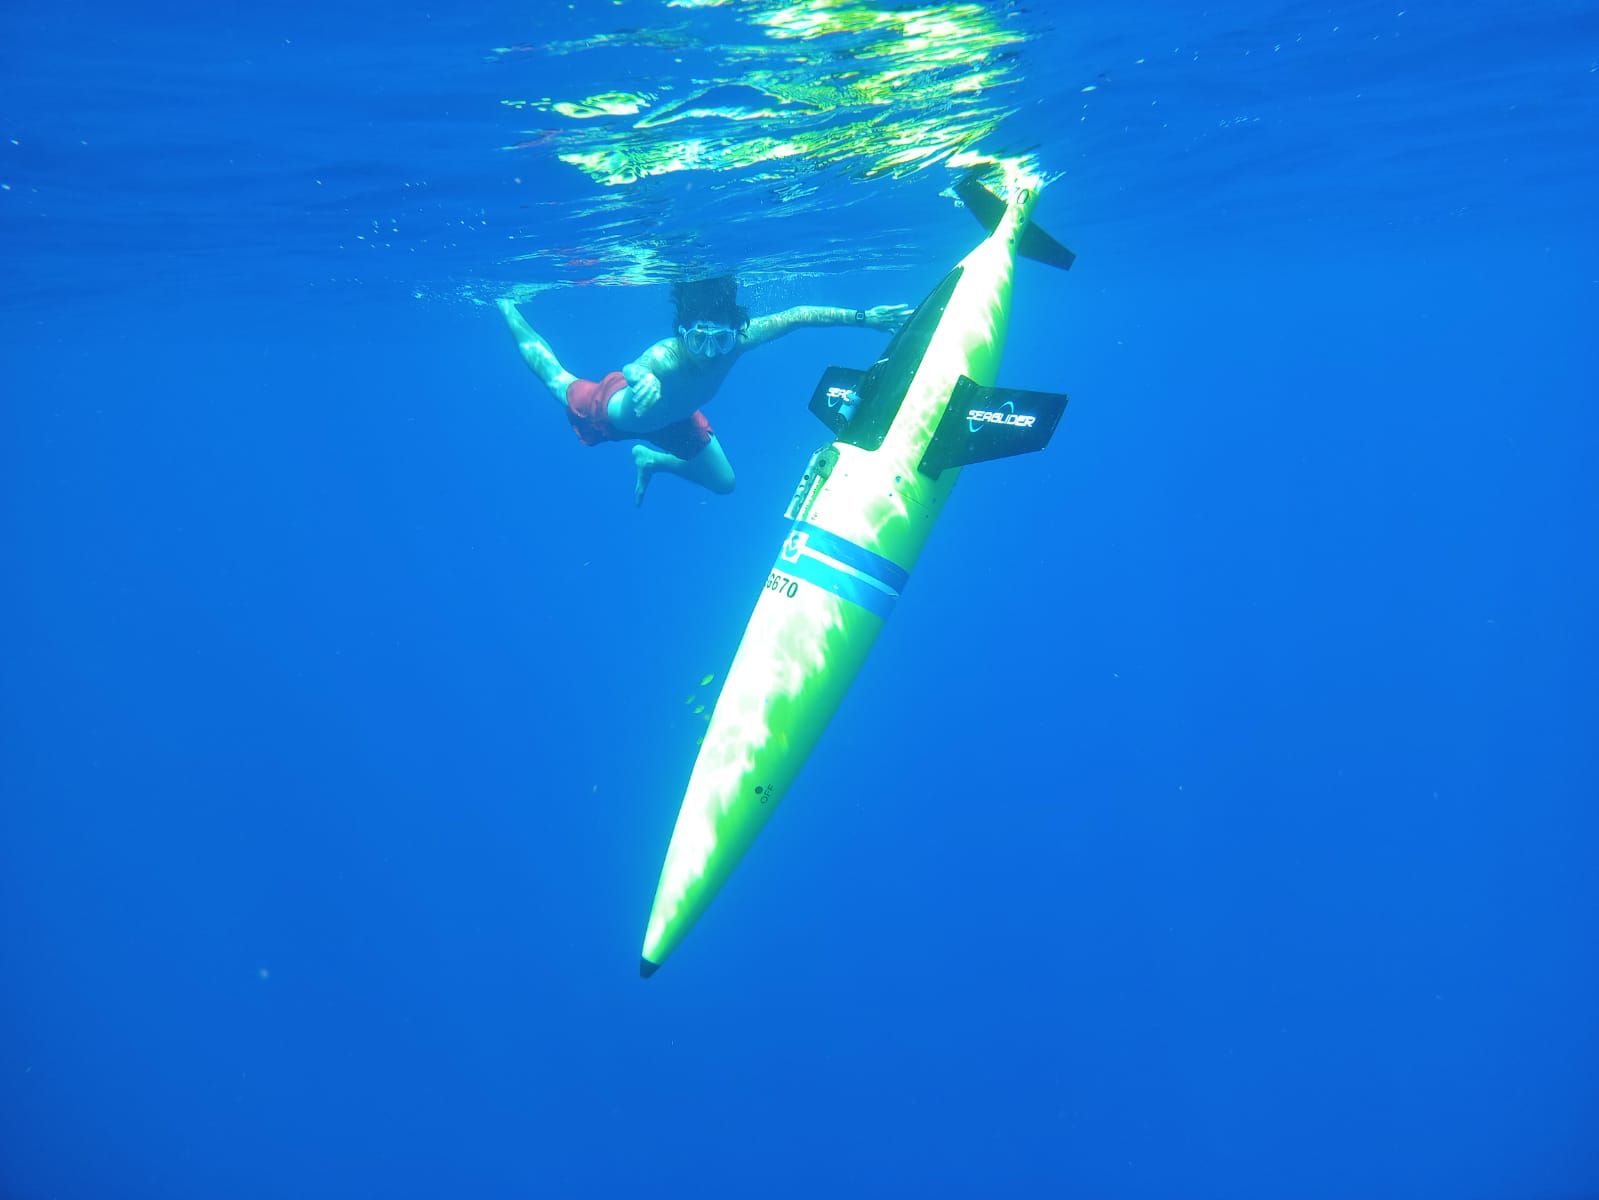 A large yellow hurricane glider underwater with a person next to it.